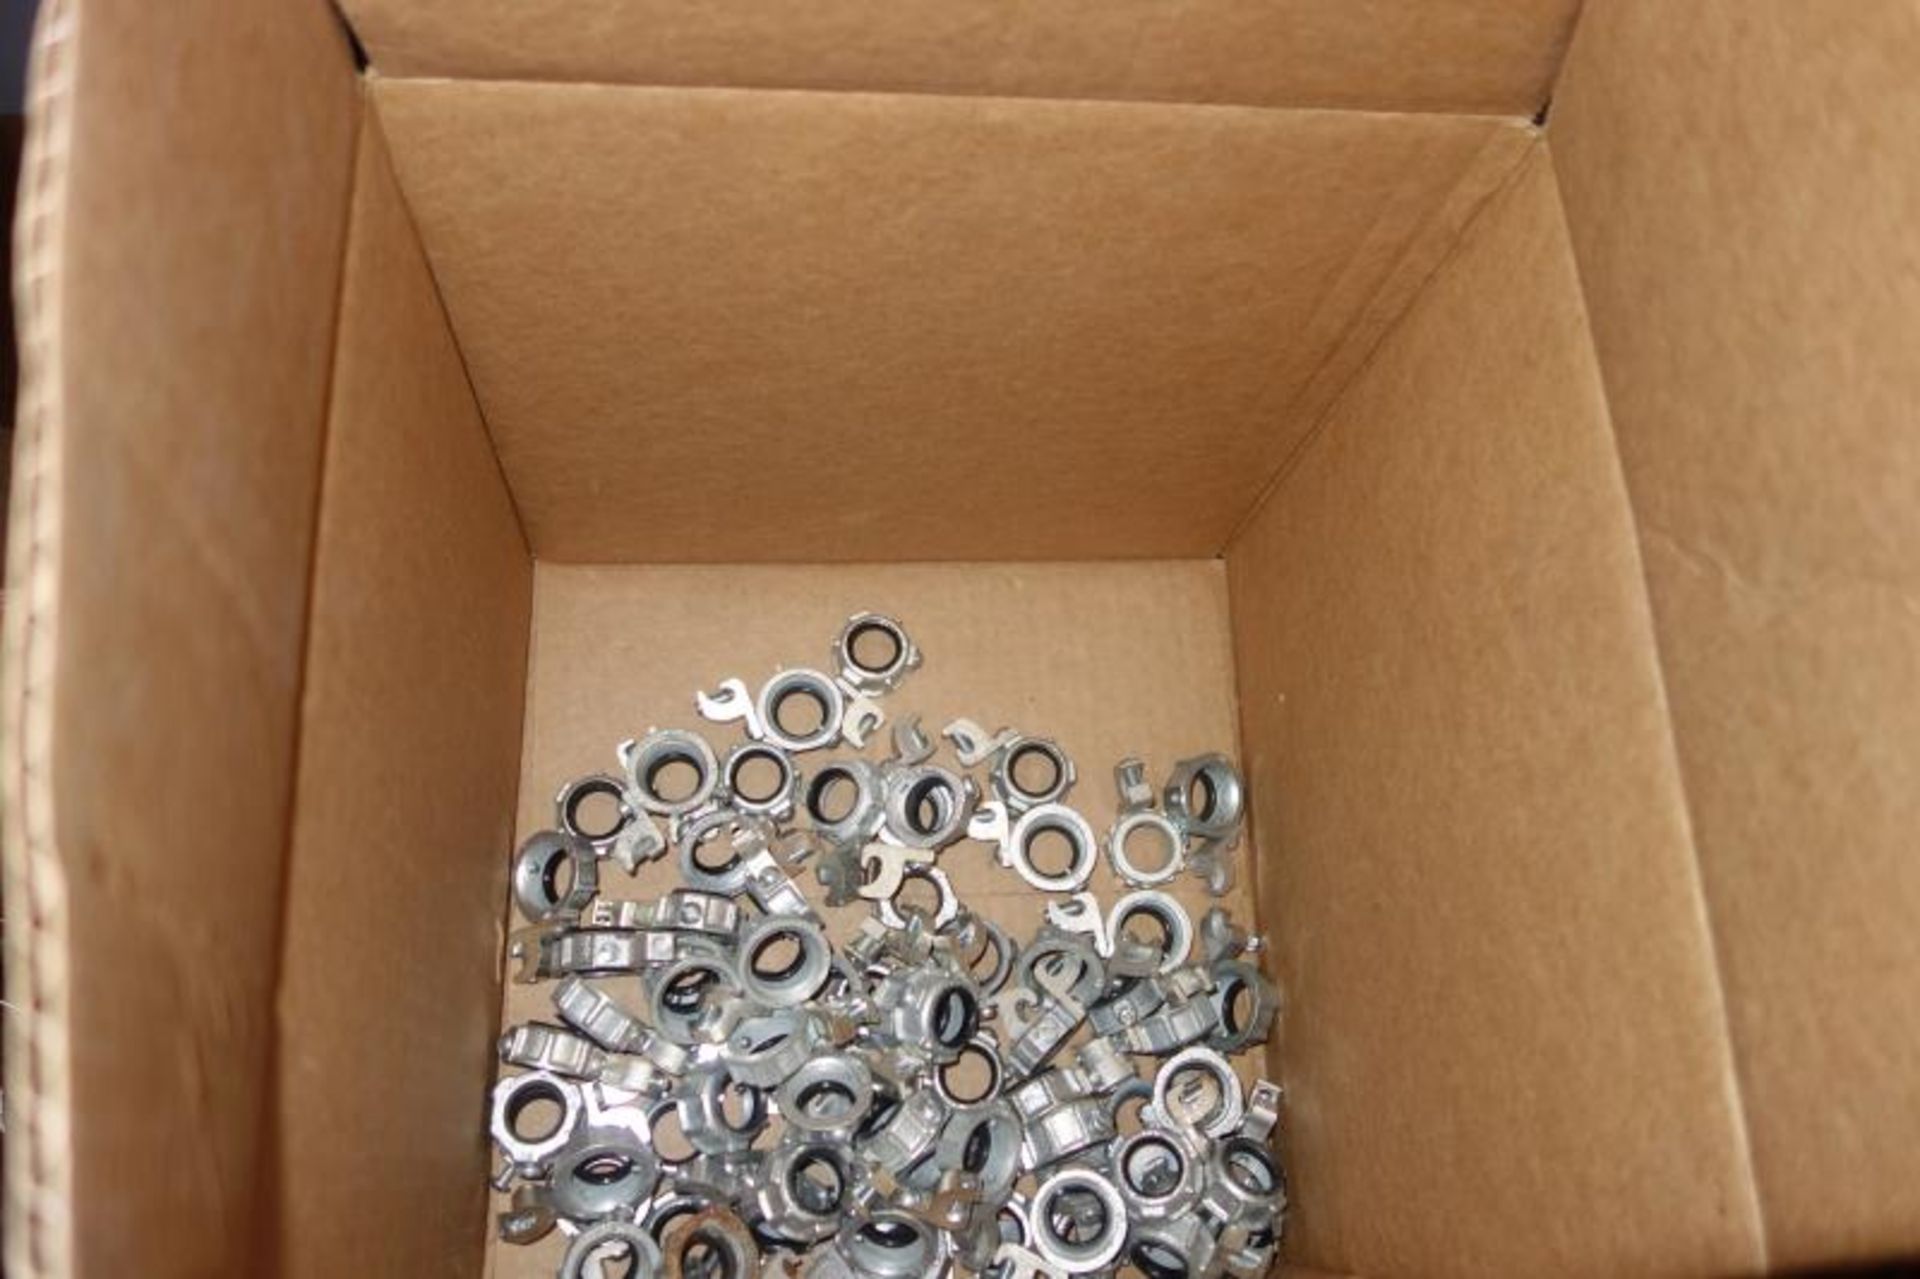 Pallet of Couplings, Chase Nipples, HD Galv Steel Loop Straps, Plastic Female Cable Connectors - Image 11 of 11